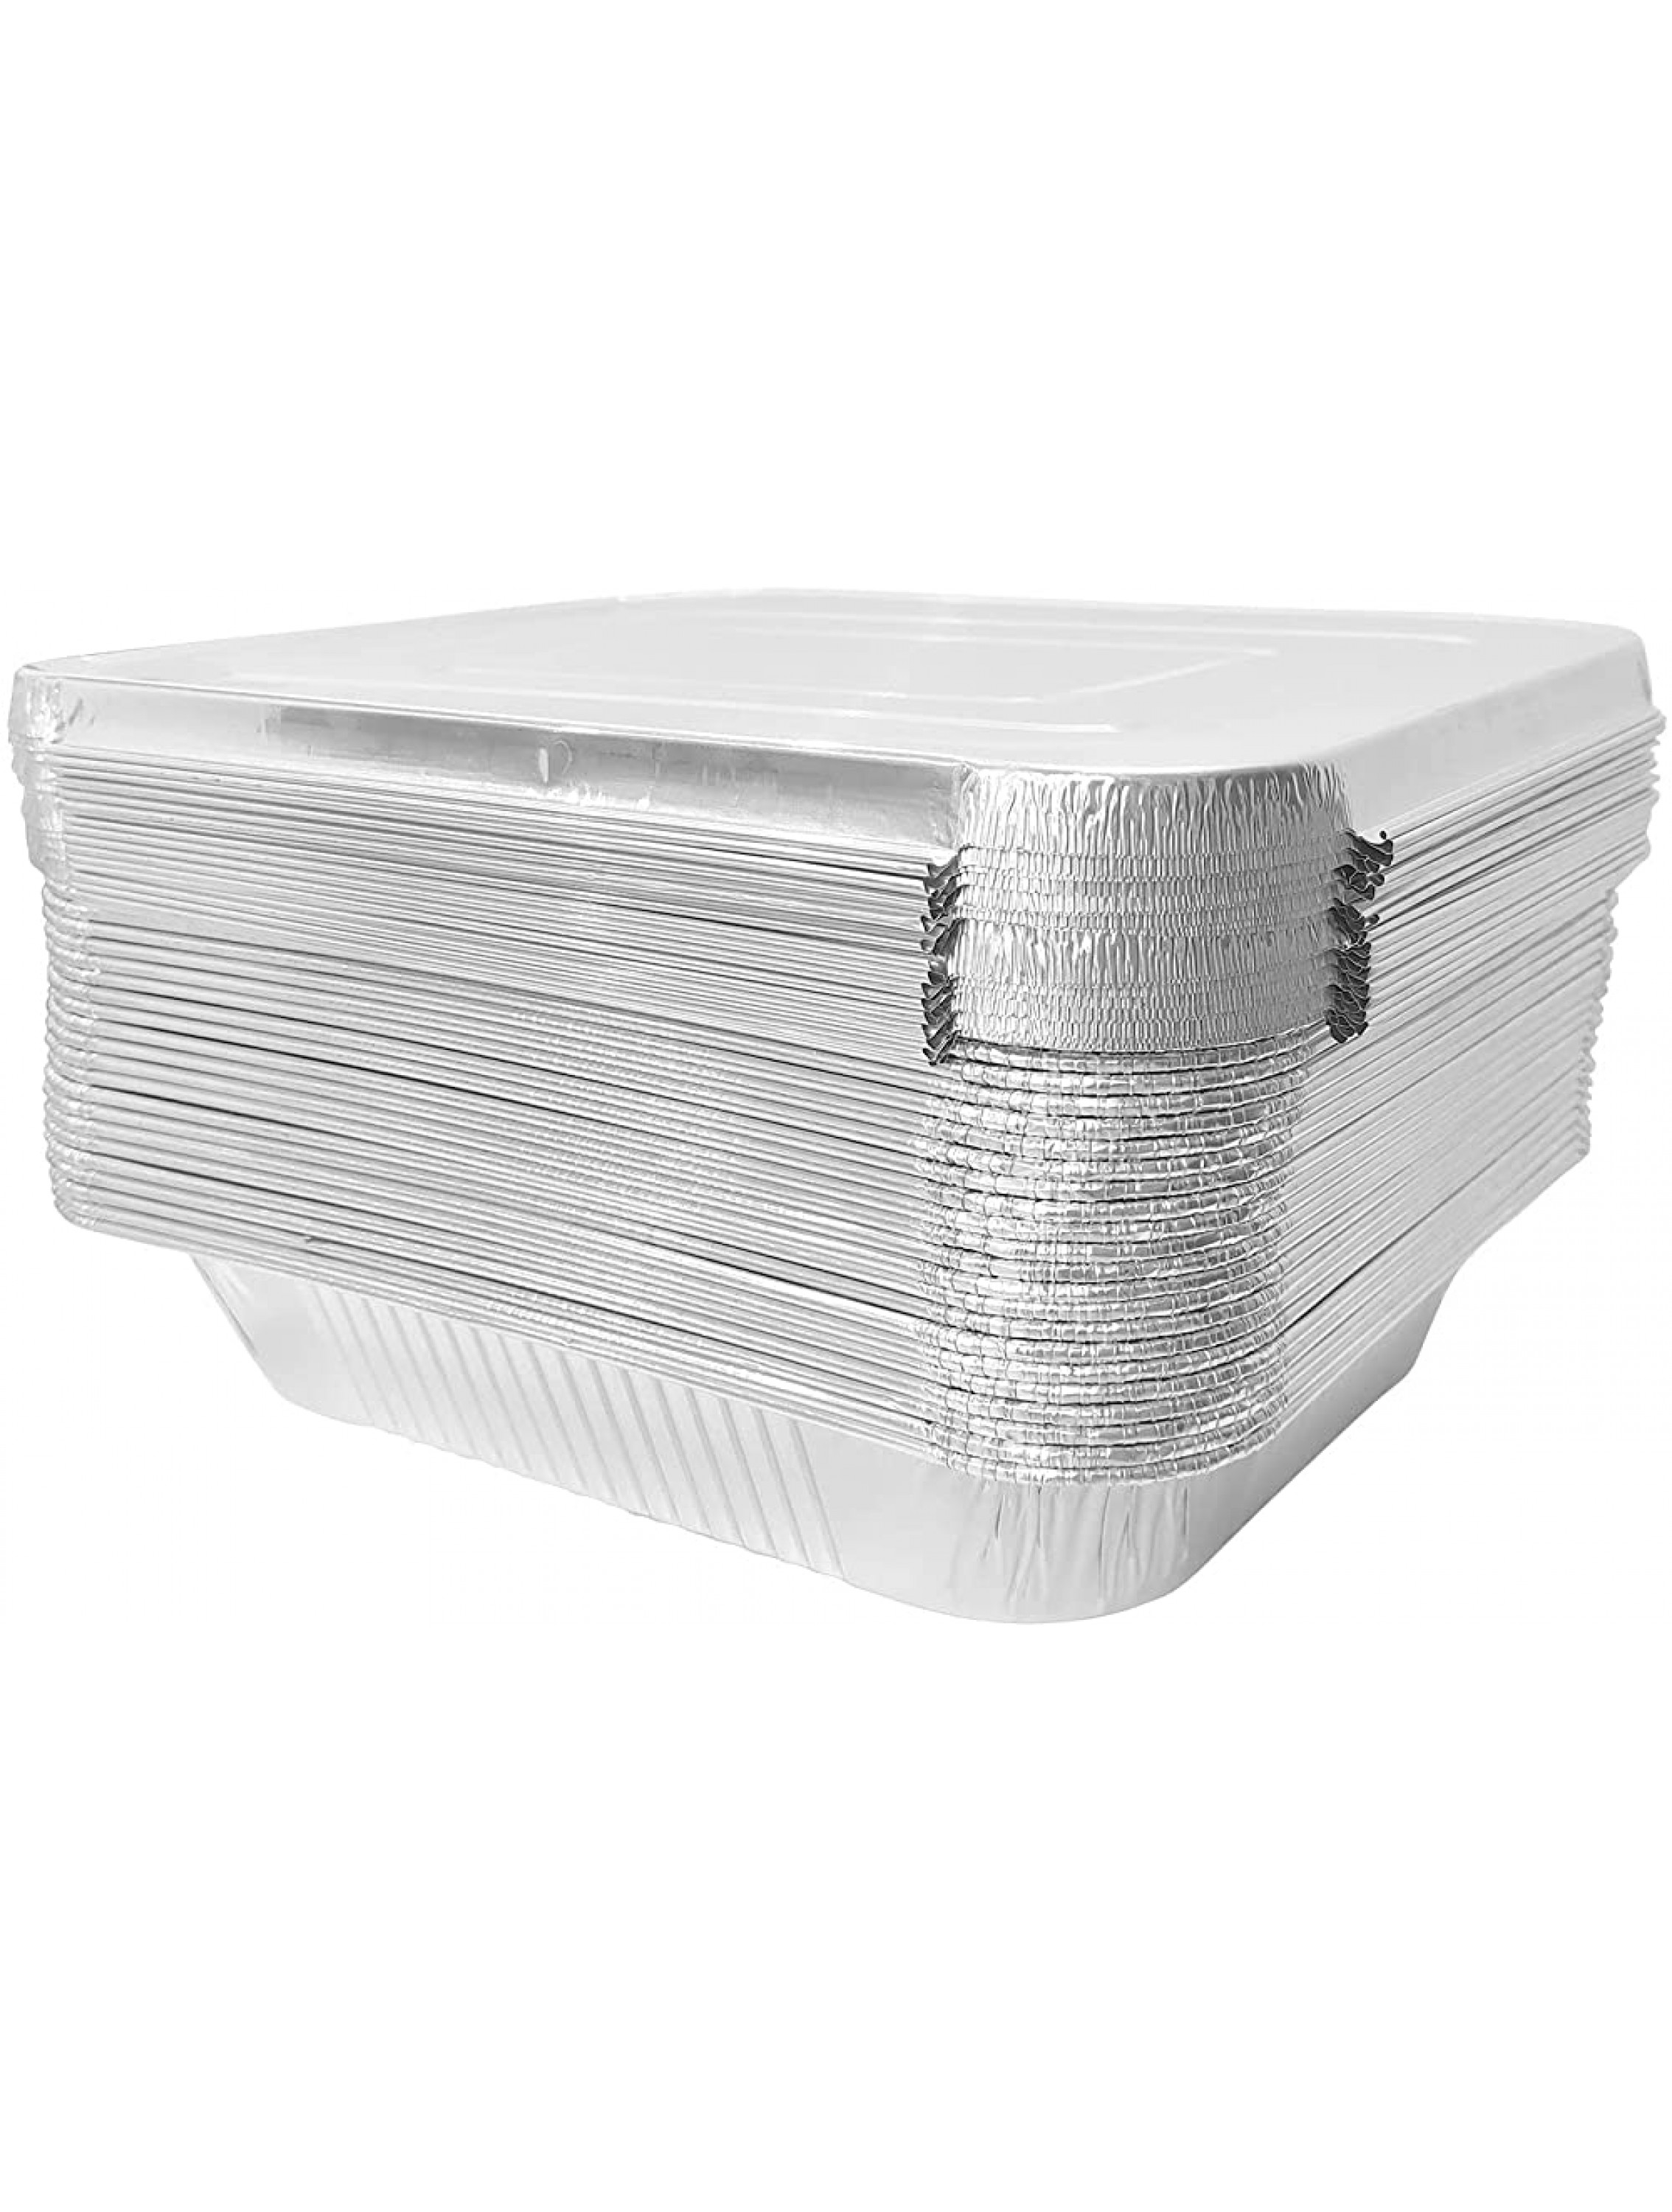 JXXH 9×13 Inches 25 Pack Disposable Aluminum Pans with Lid,Half-Size Deep Aluminum Pans For Grilling,Baking,Heating,Cooking,Food Preparation. - B78X5YZXE